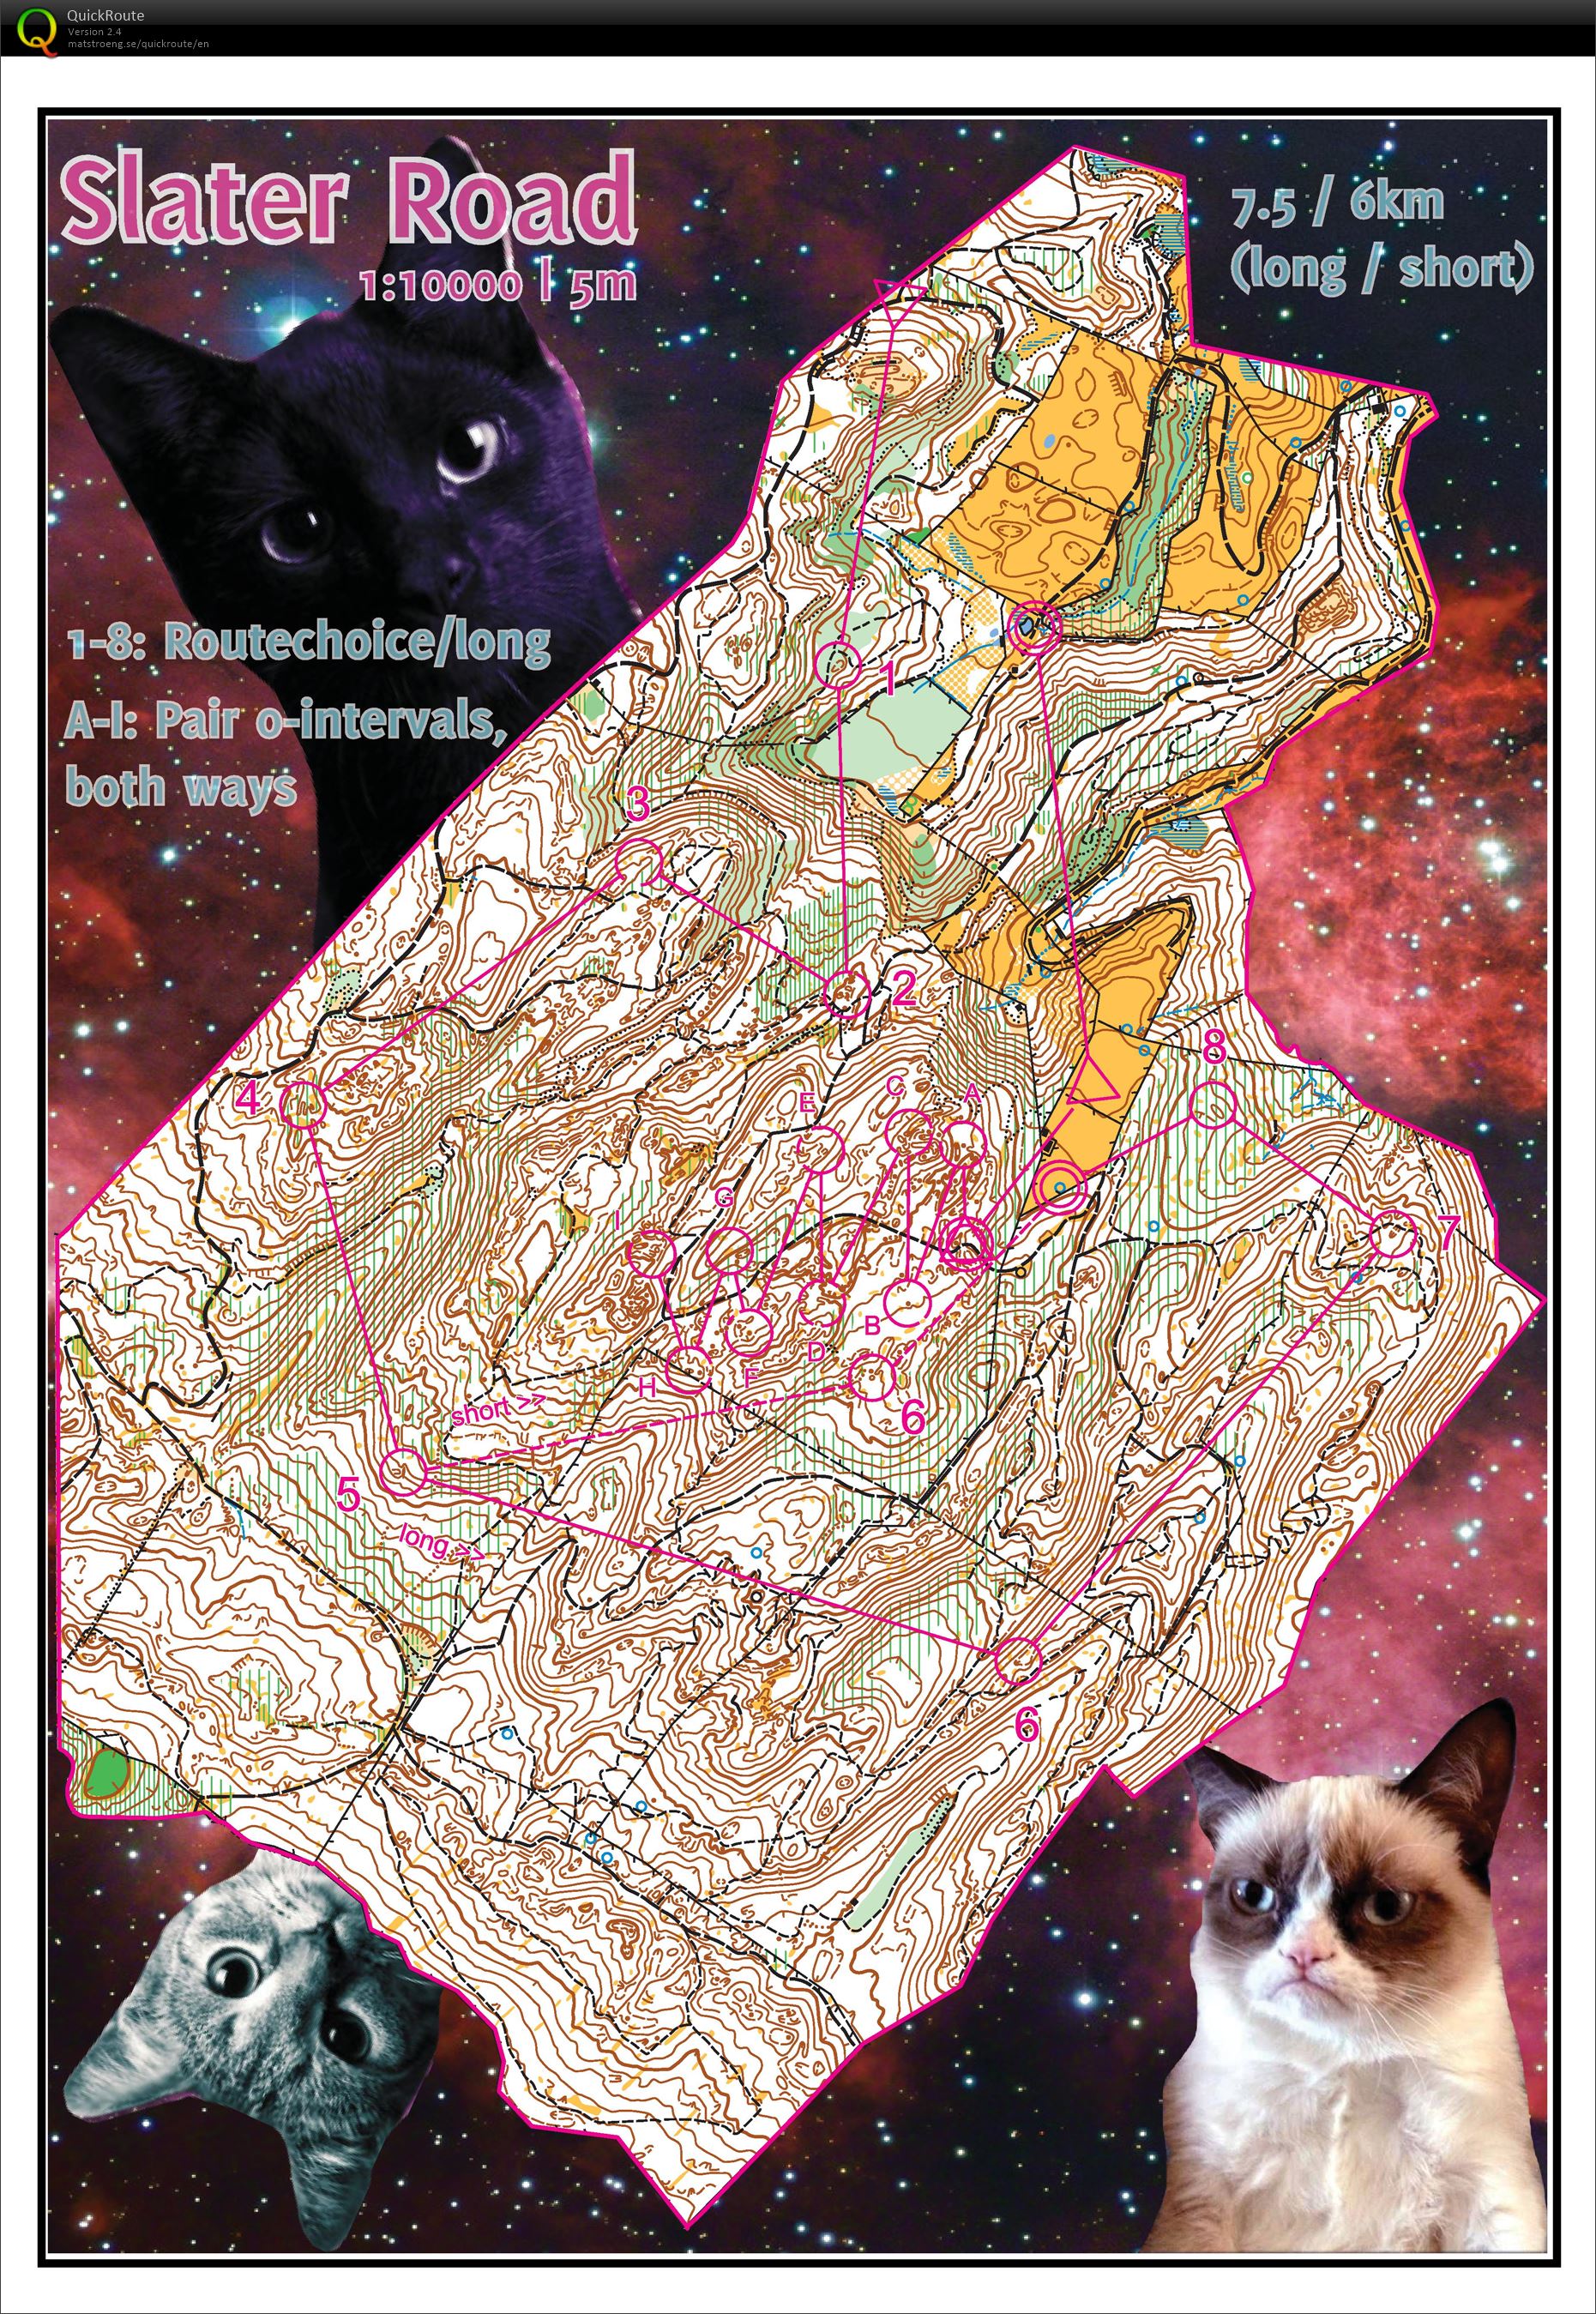 Space Cats - Part 2 (2014-04-26)